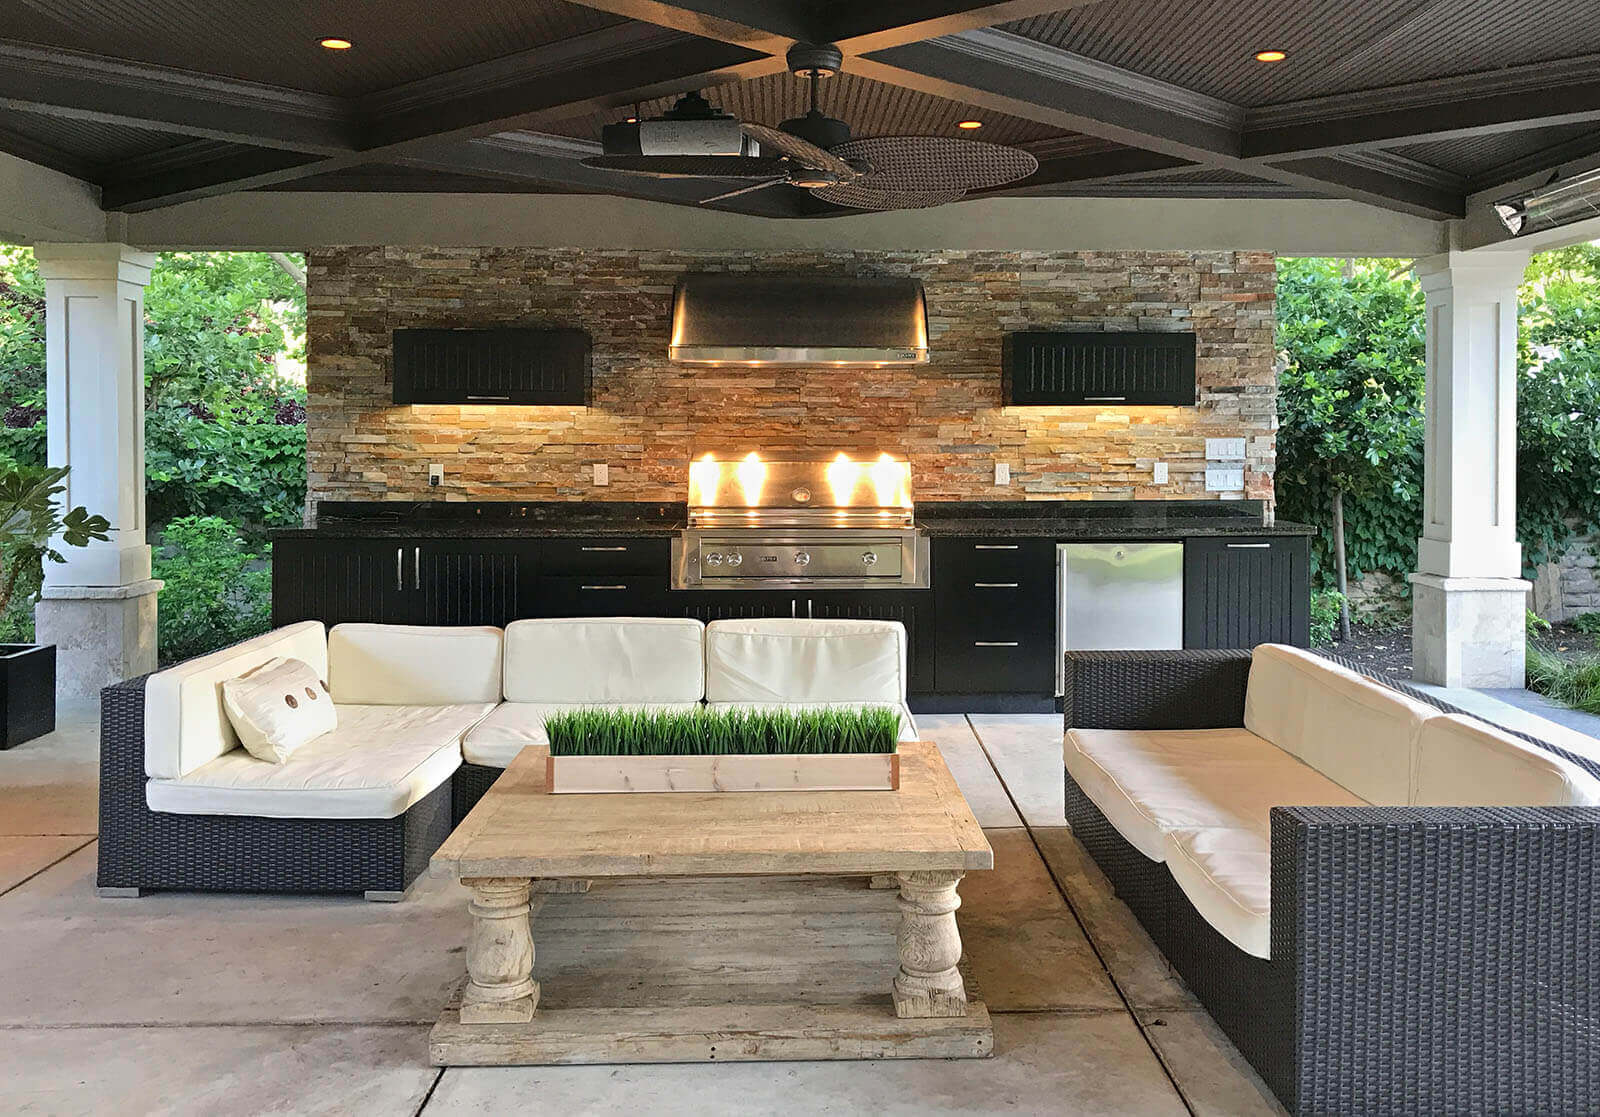 Warmly lit outdoor lounge with dark contemporary ceiling and outdoor kitchen with stone details